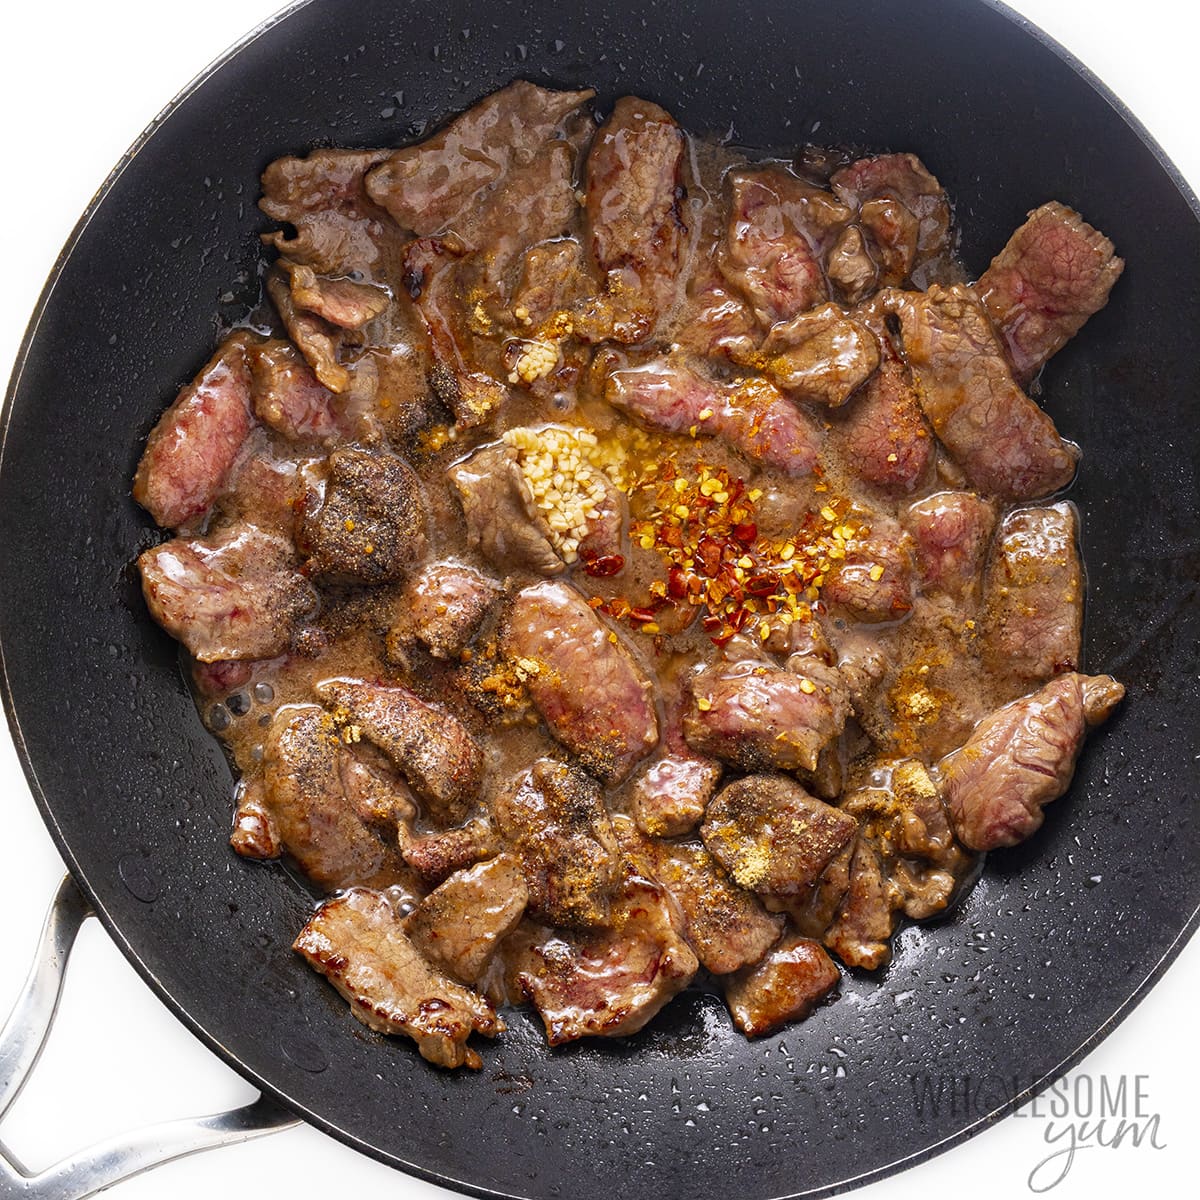 Beef with additional garlic and pepper added.